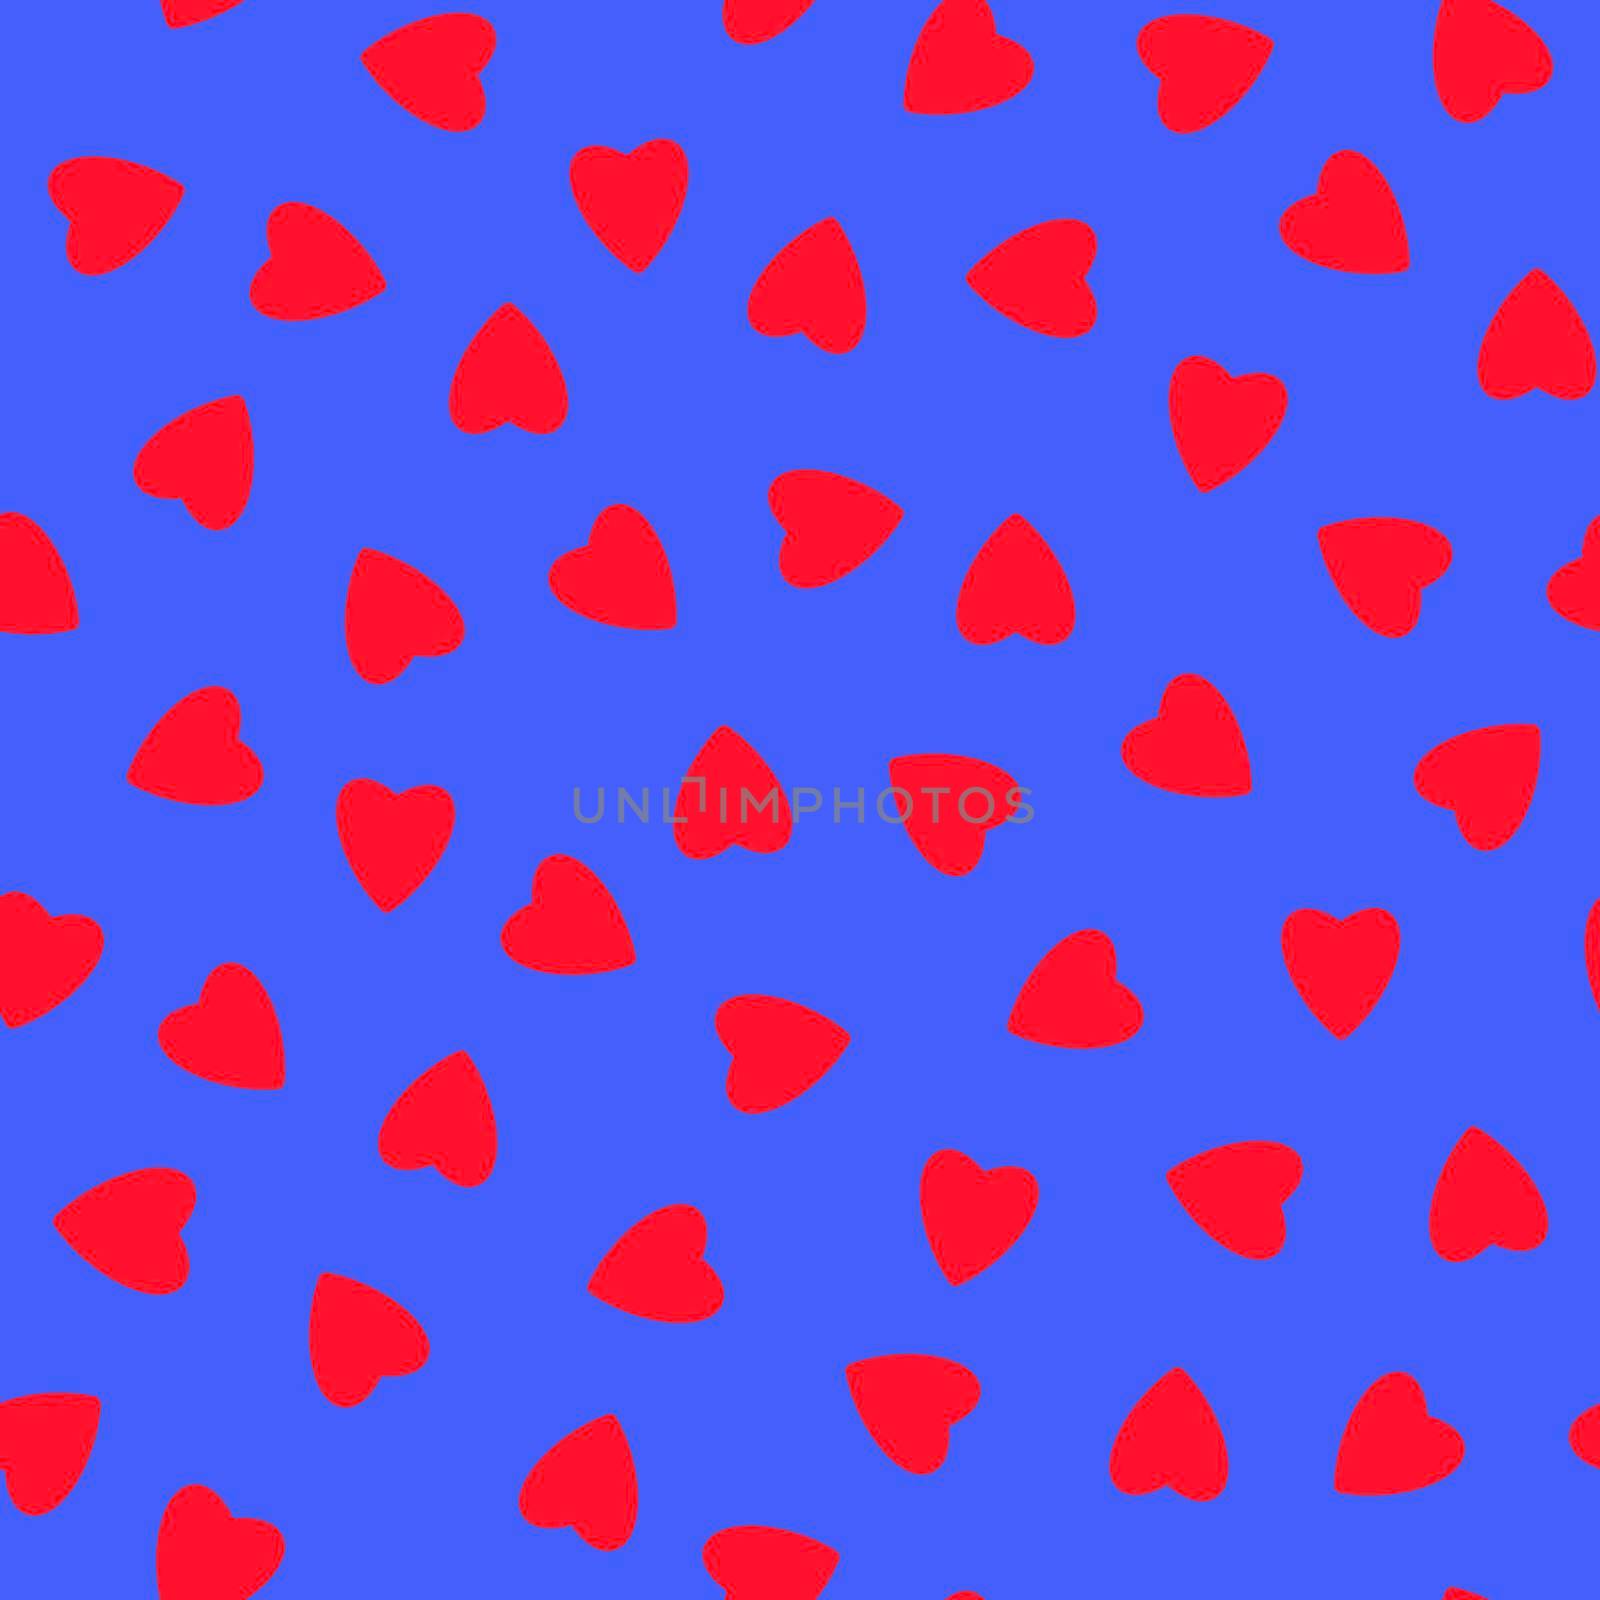 Simple hearts seamless pattern,endless chaotic texture made of tiny heart silhouettes.Valentines,mothers day background.Great for Easter,wedding,scrapbook,gift wrapping paper,textiles.Re on blue